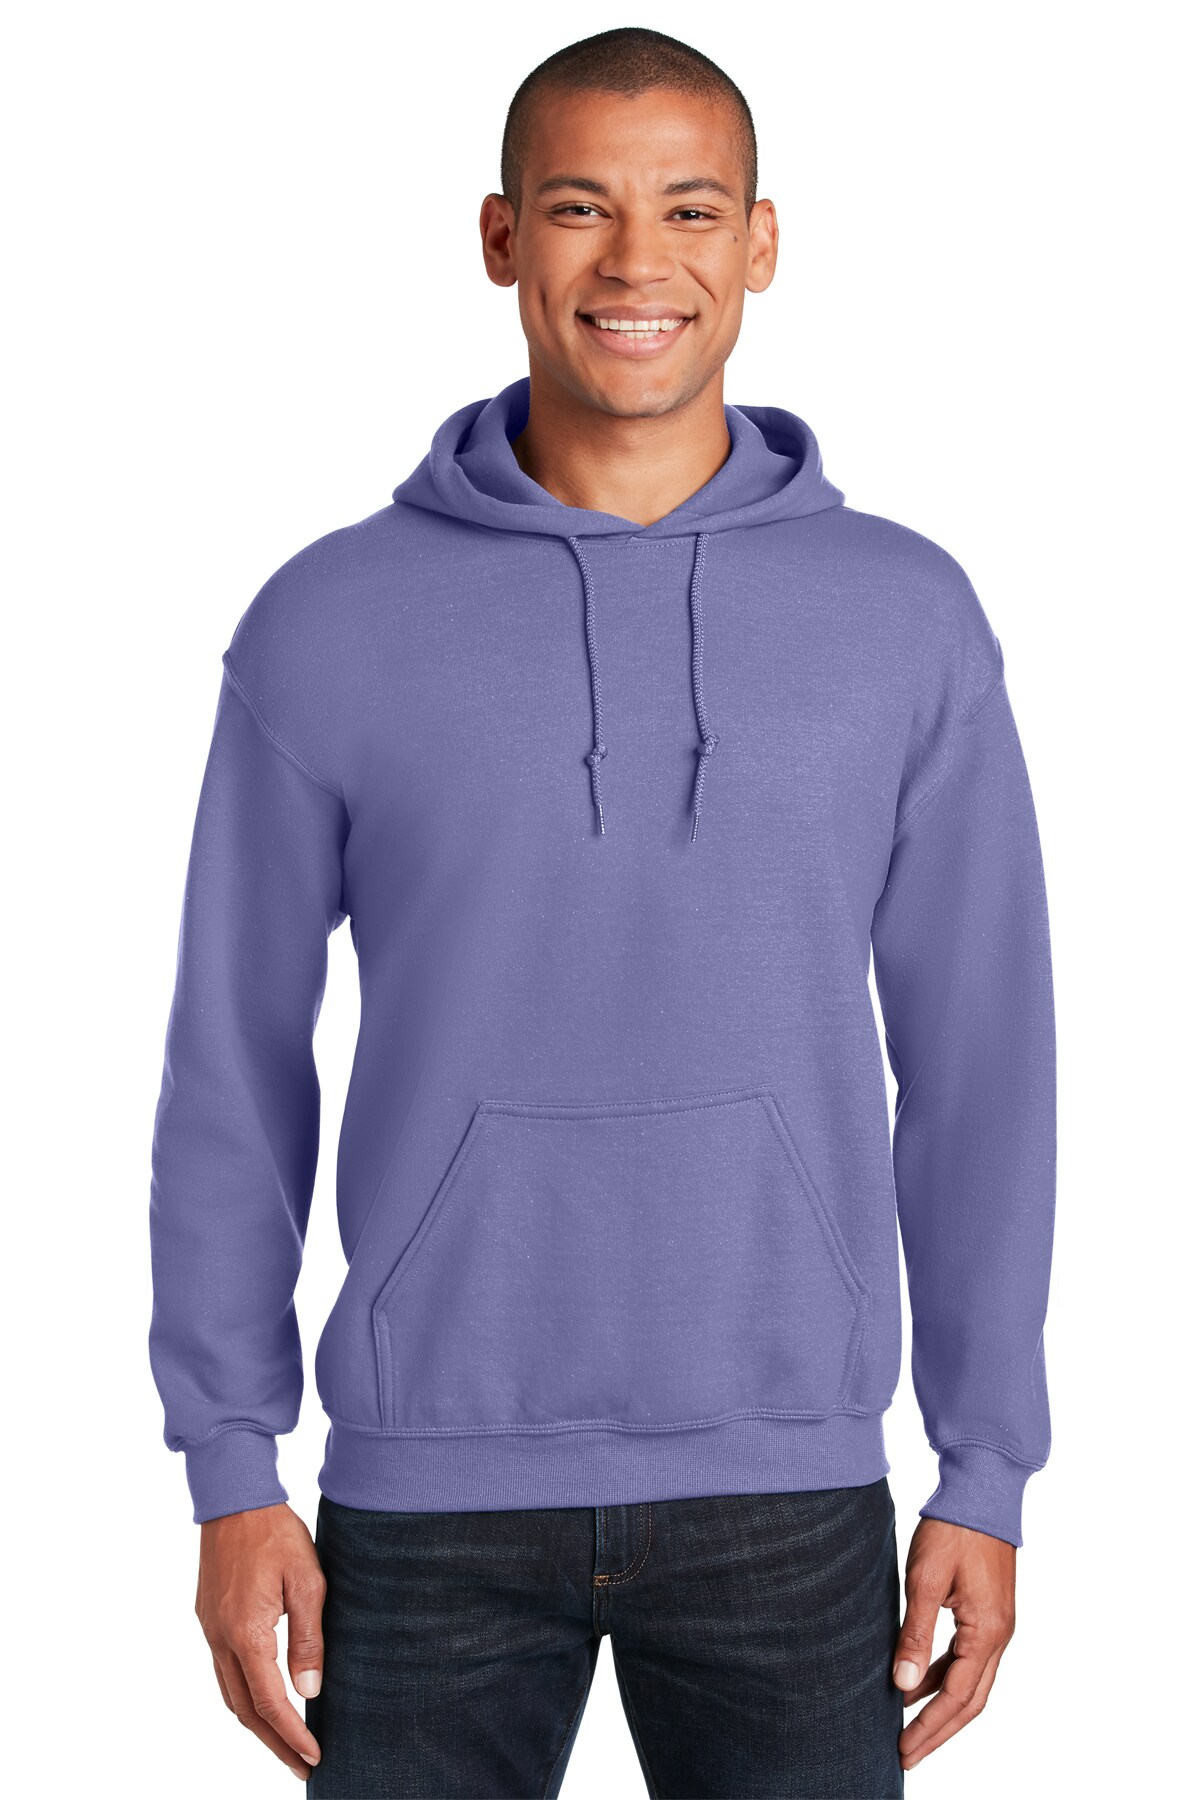 Gildan - Heavy Blend Hooded Sweatshirt, 8-Ounce Cotton/Poly Fabrication  for Ultimate Comfort and Style, Experience the luxury of coziness with the  Gildan Heavy Blend Hooded Sweatshirt